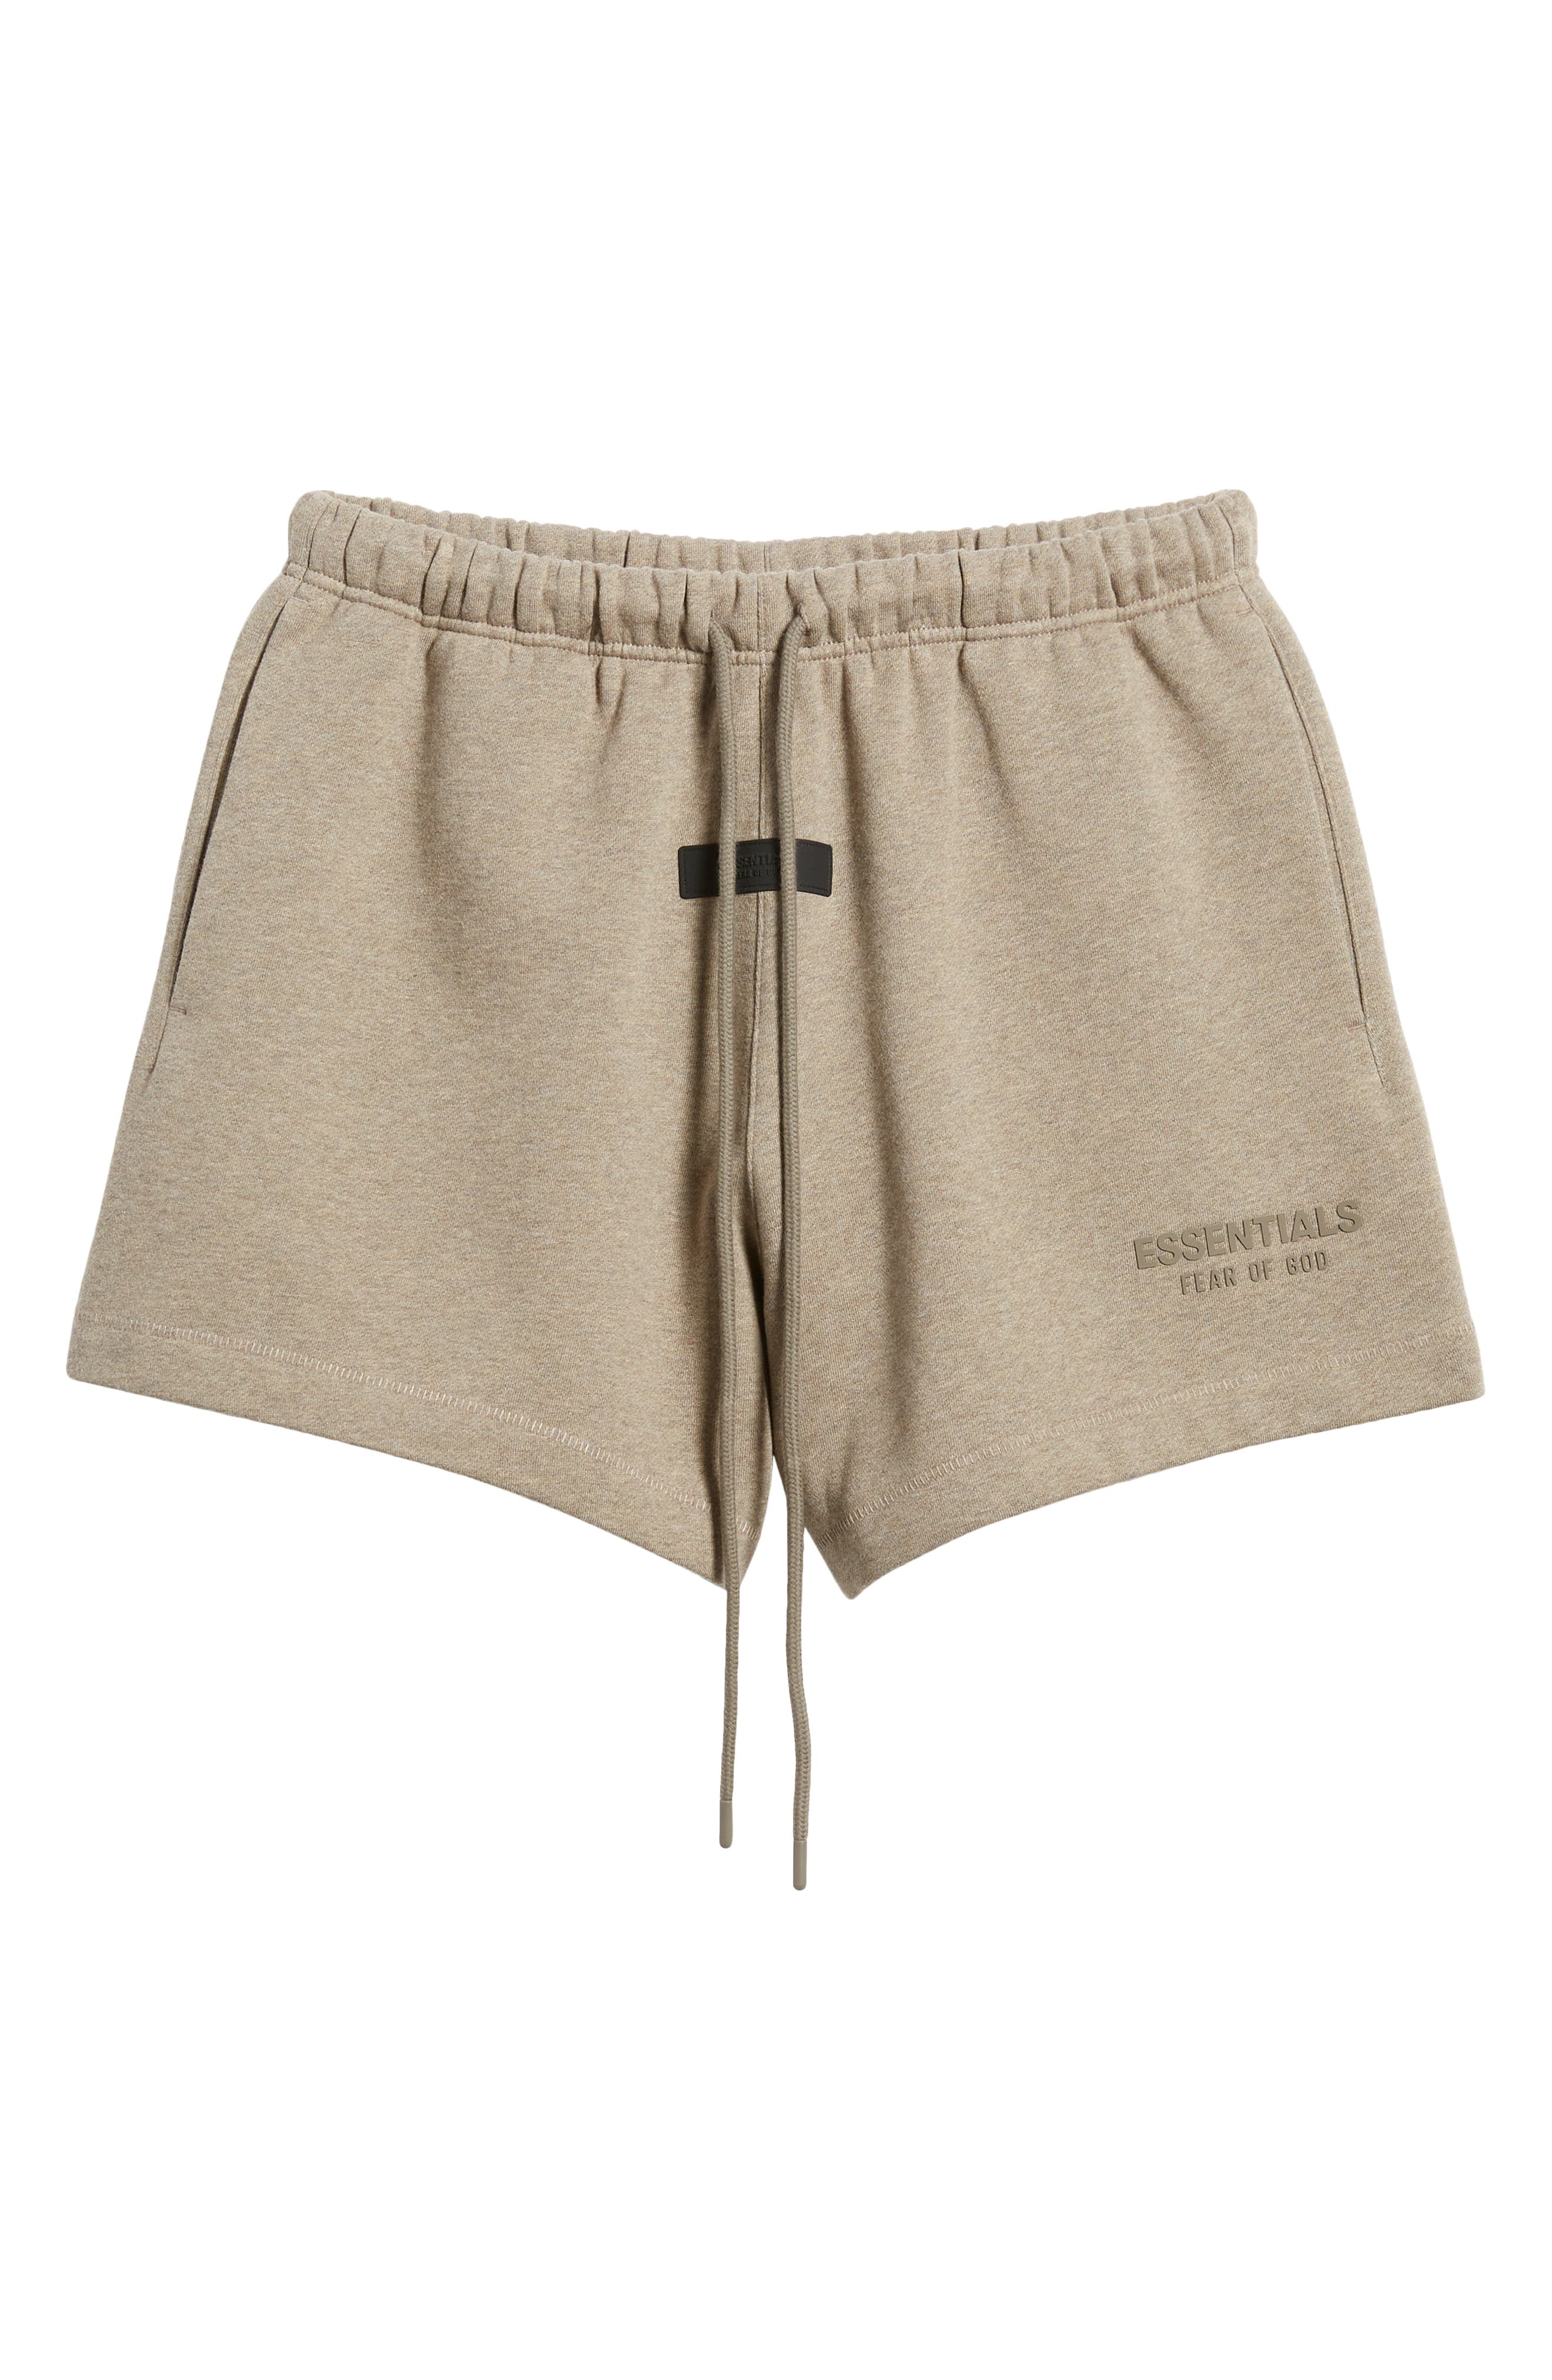 Fear of God Essentials Oversize Sweat Shorts | Nordstrom